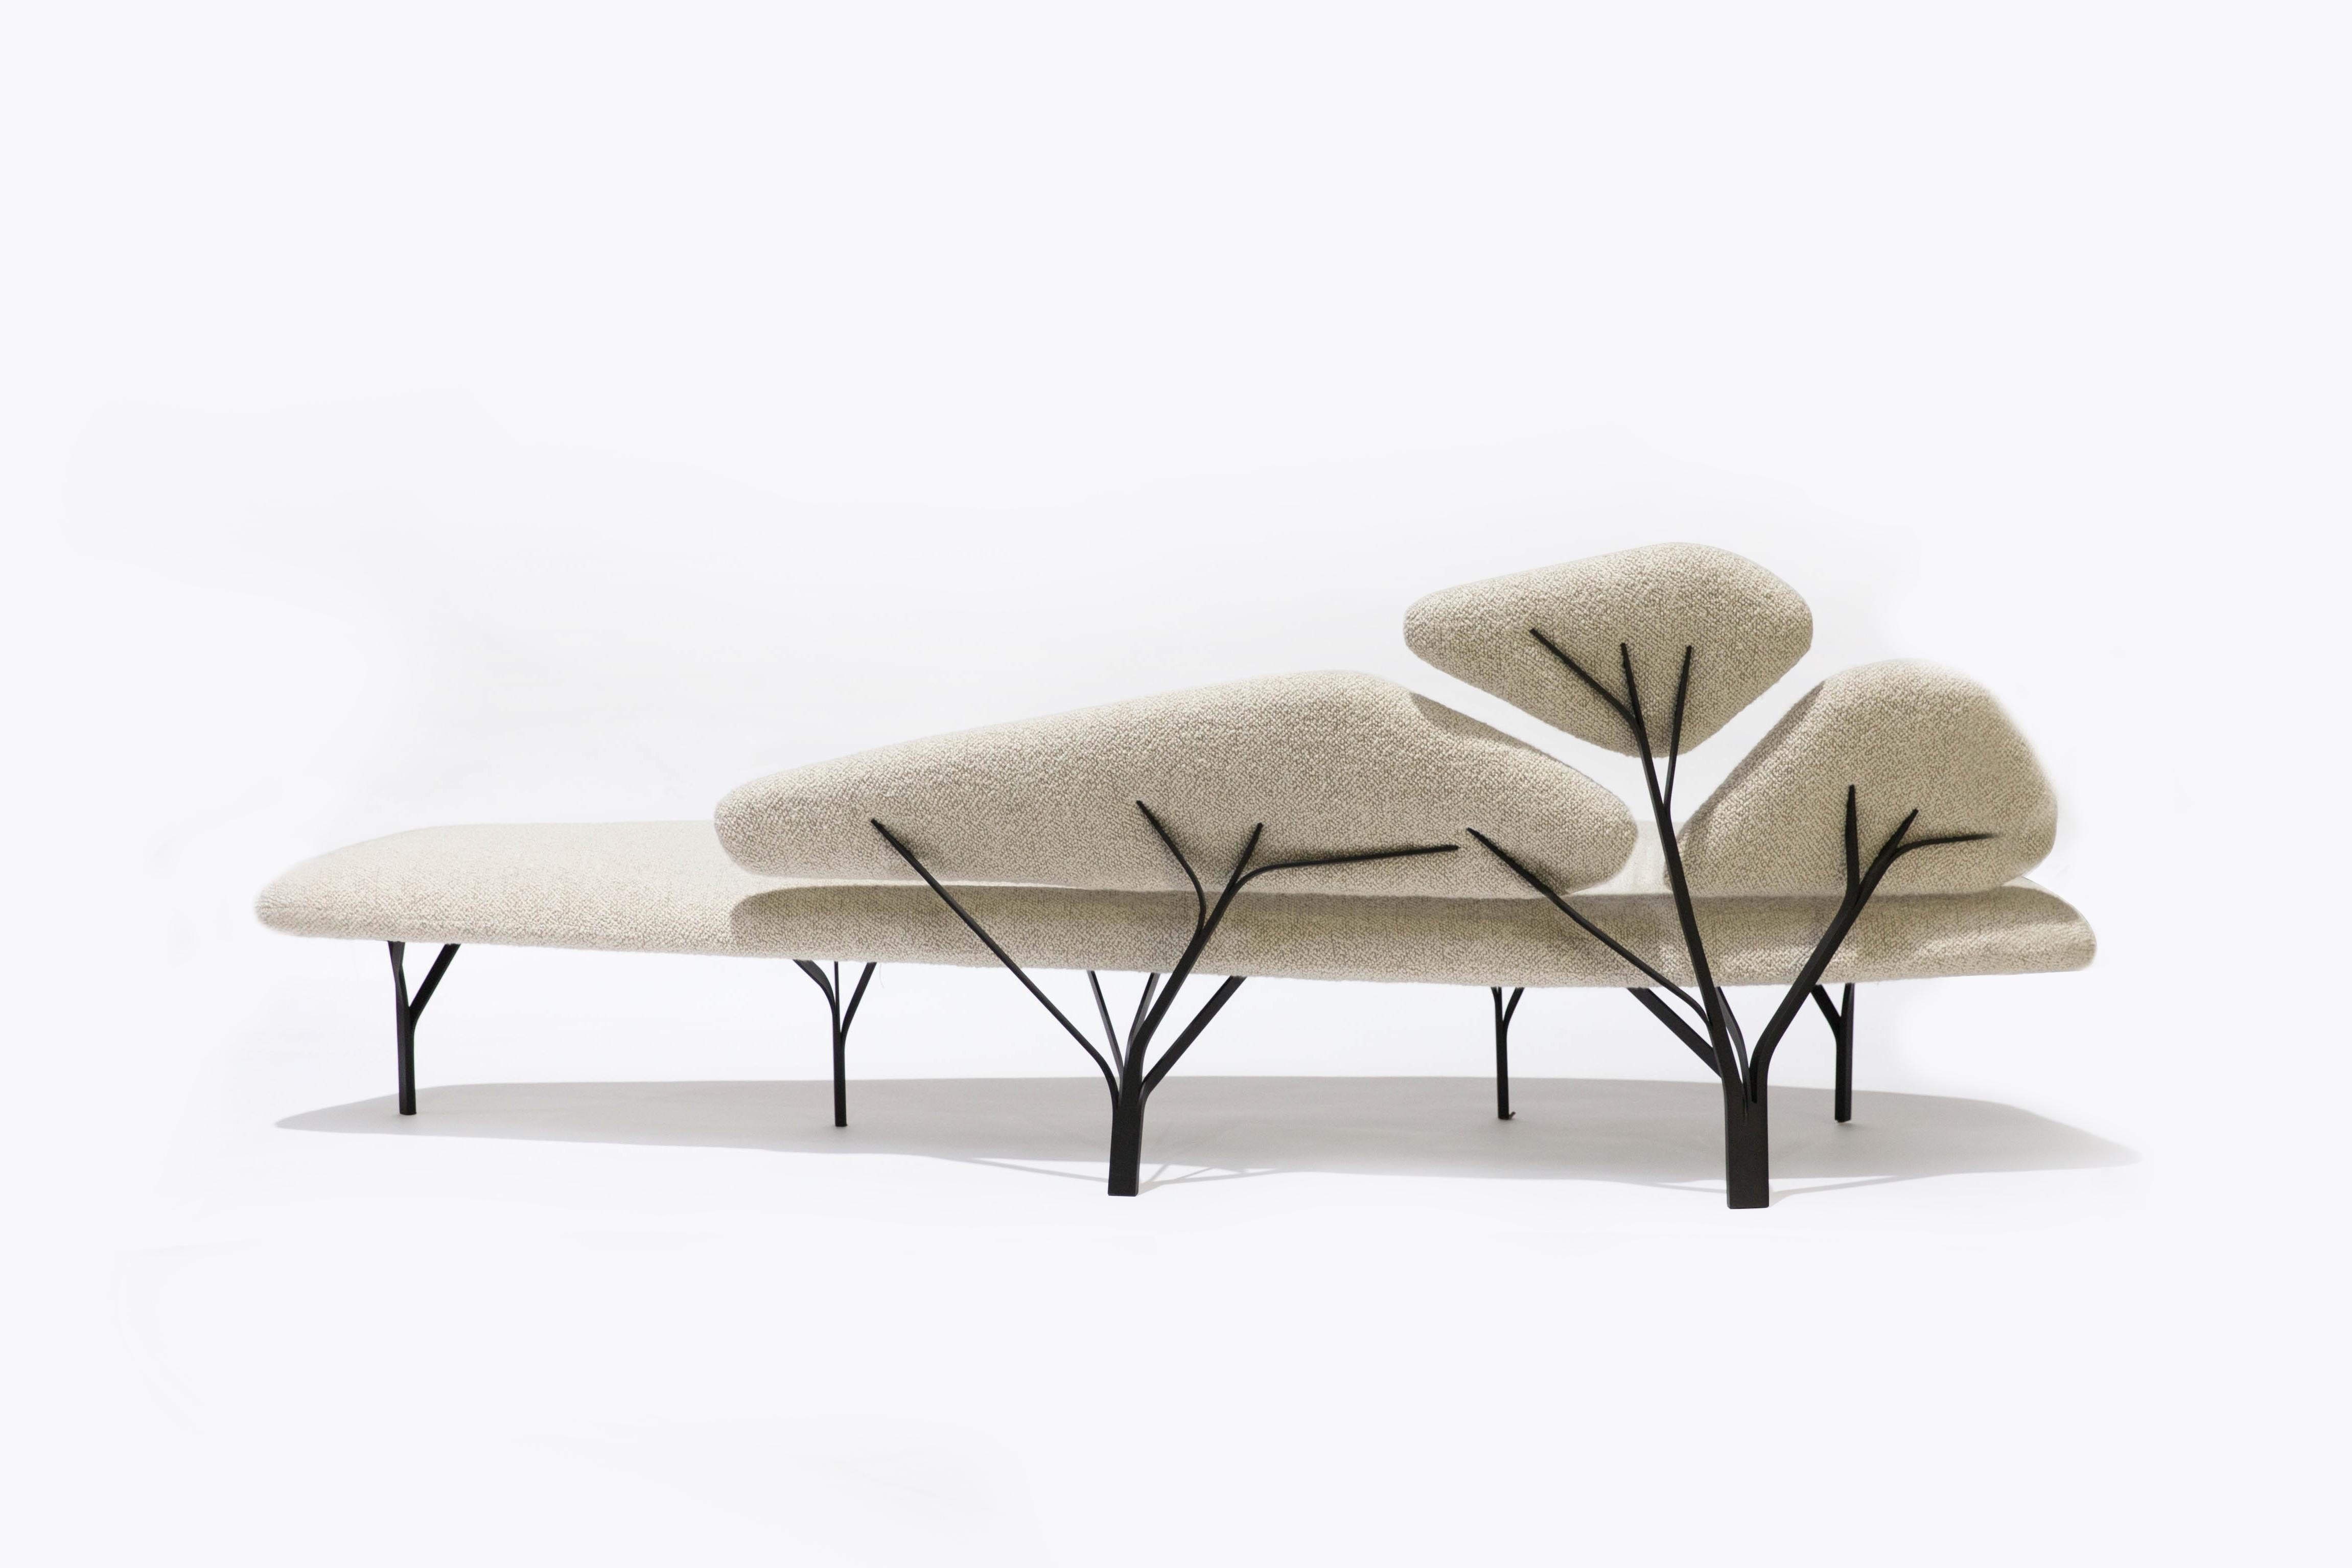 Special edition Pierre Frey Fabric - Borghese sofa - Noé Duchaufour Lawrance

Borghese is a light sofa inspired by the stone pines of the Villa Borghese in Roma. The metal structure reproduces the network of branches and supports the back cushions,